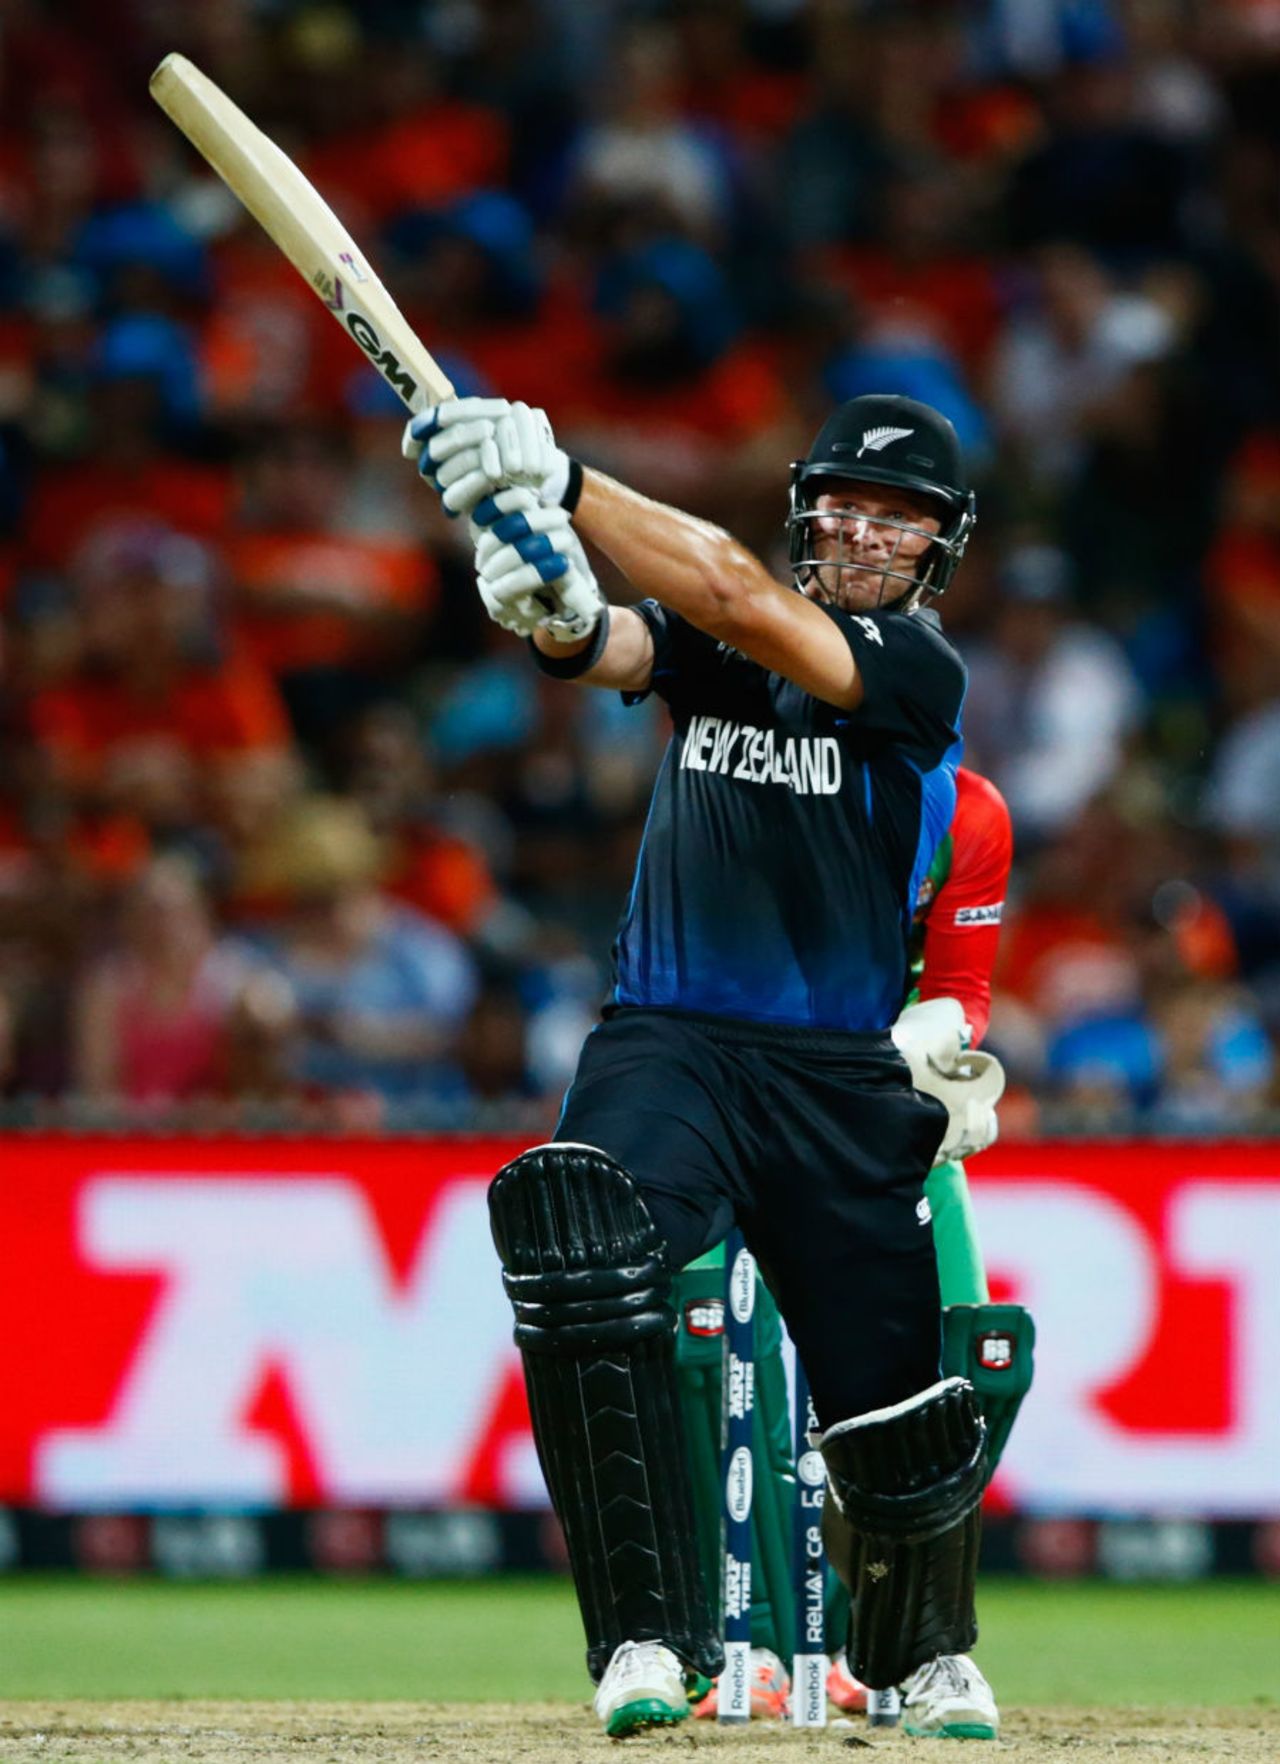 Corey Anderson dispatches the ball over the sightscreen, New Zealand v Bangladesh, World Cup 2015, Group A, Hamilton, March 13, 2015